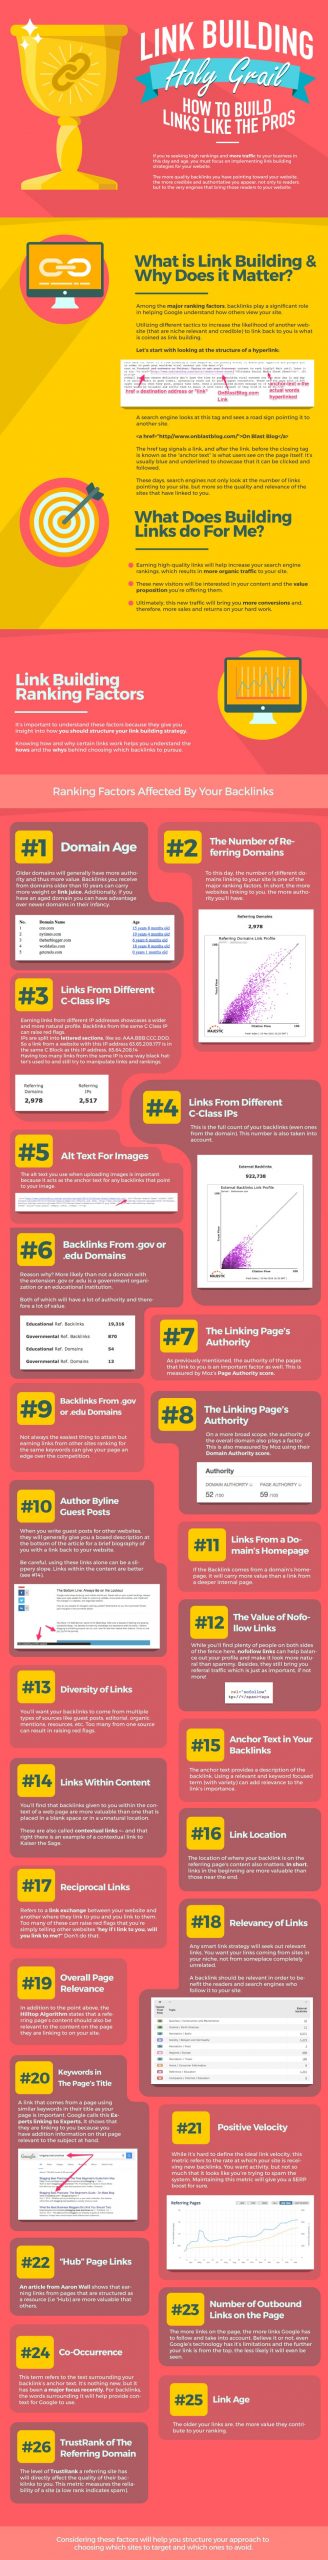 Link building Infographic